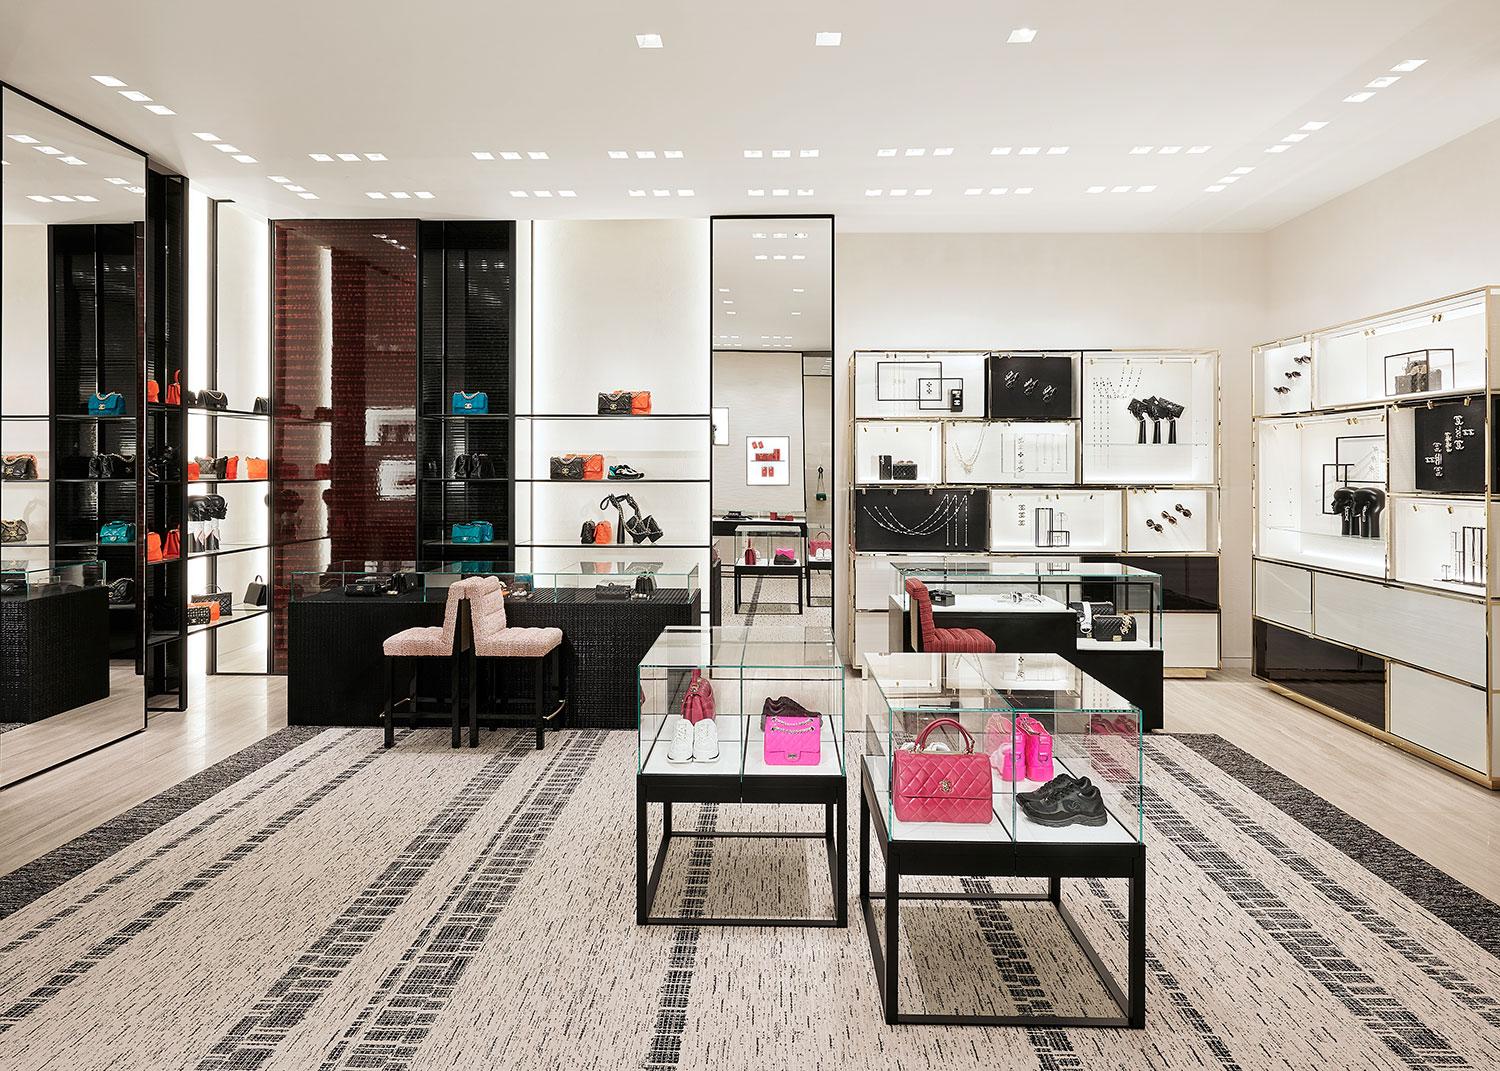 Chanel opens new boutique in Abu Dhabi